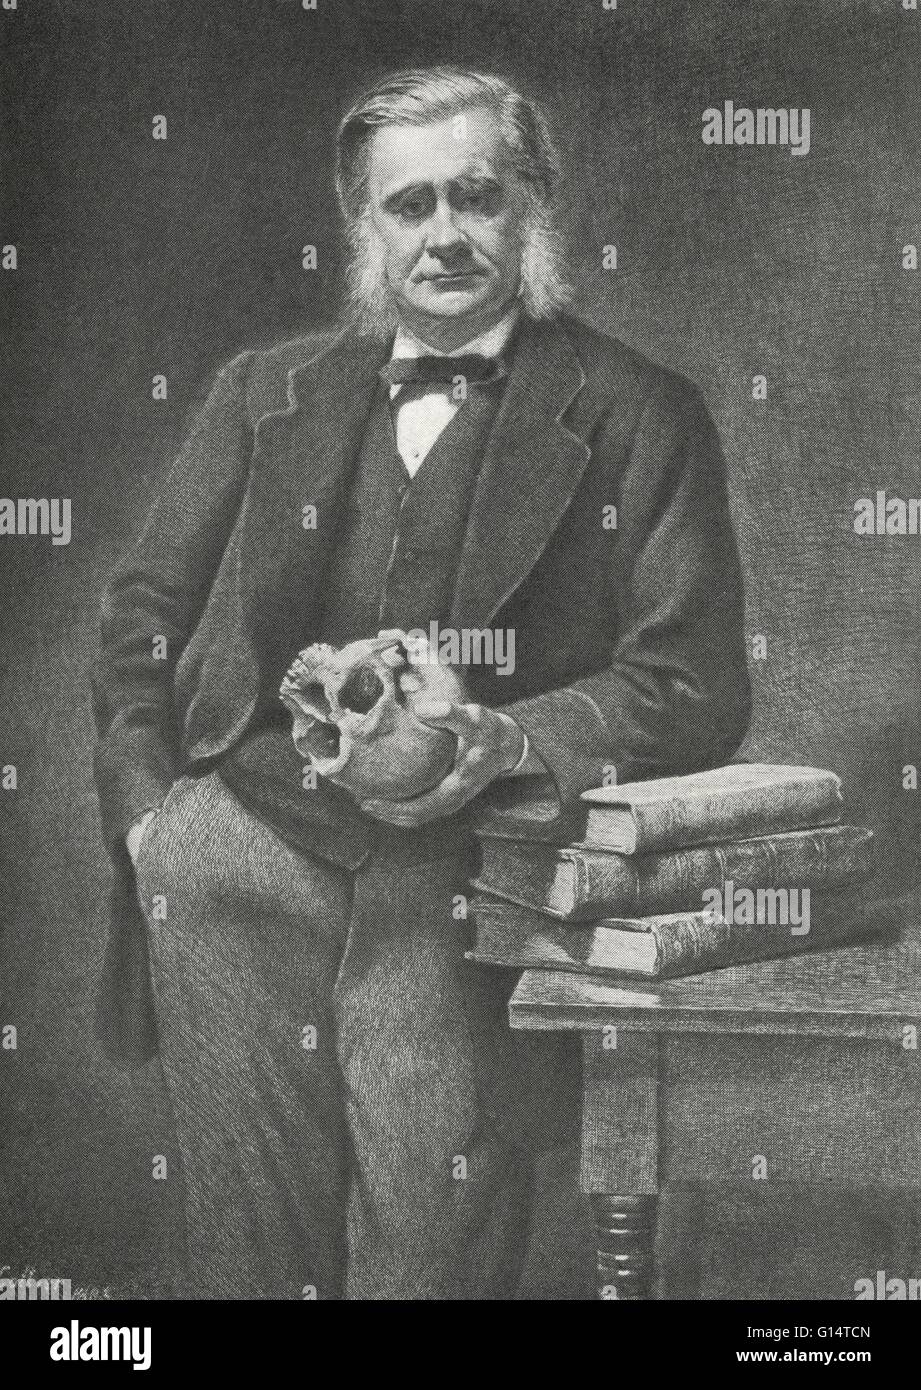 Thomas Henry Huxley (1825-1895) was an English biologist, known as 'Darwin's Bulldog' for his advocacy of Charles Darwin's theory of evolution. Huxley's famous 1860 debate with Samuel Wilberforce was a key moment in the wider acceptance of evolution, and Stock Photo